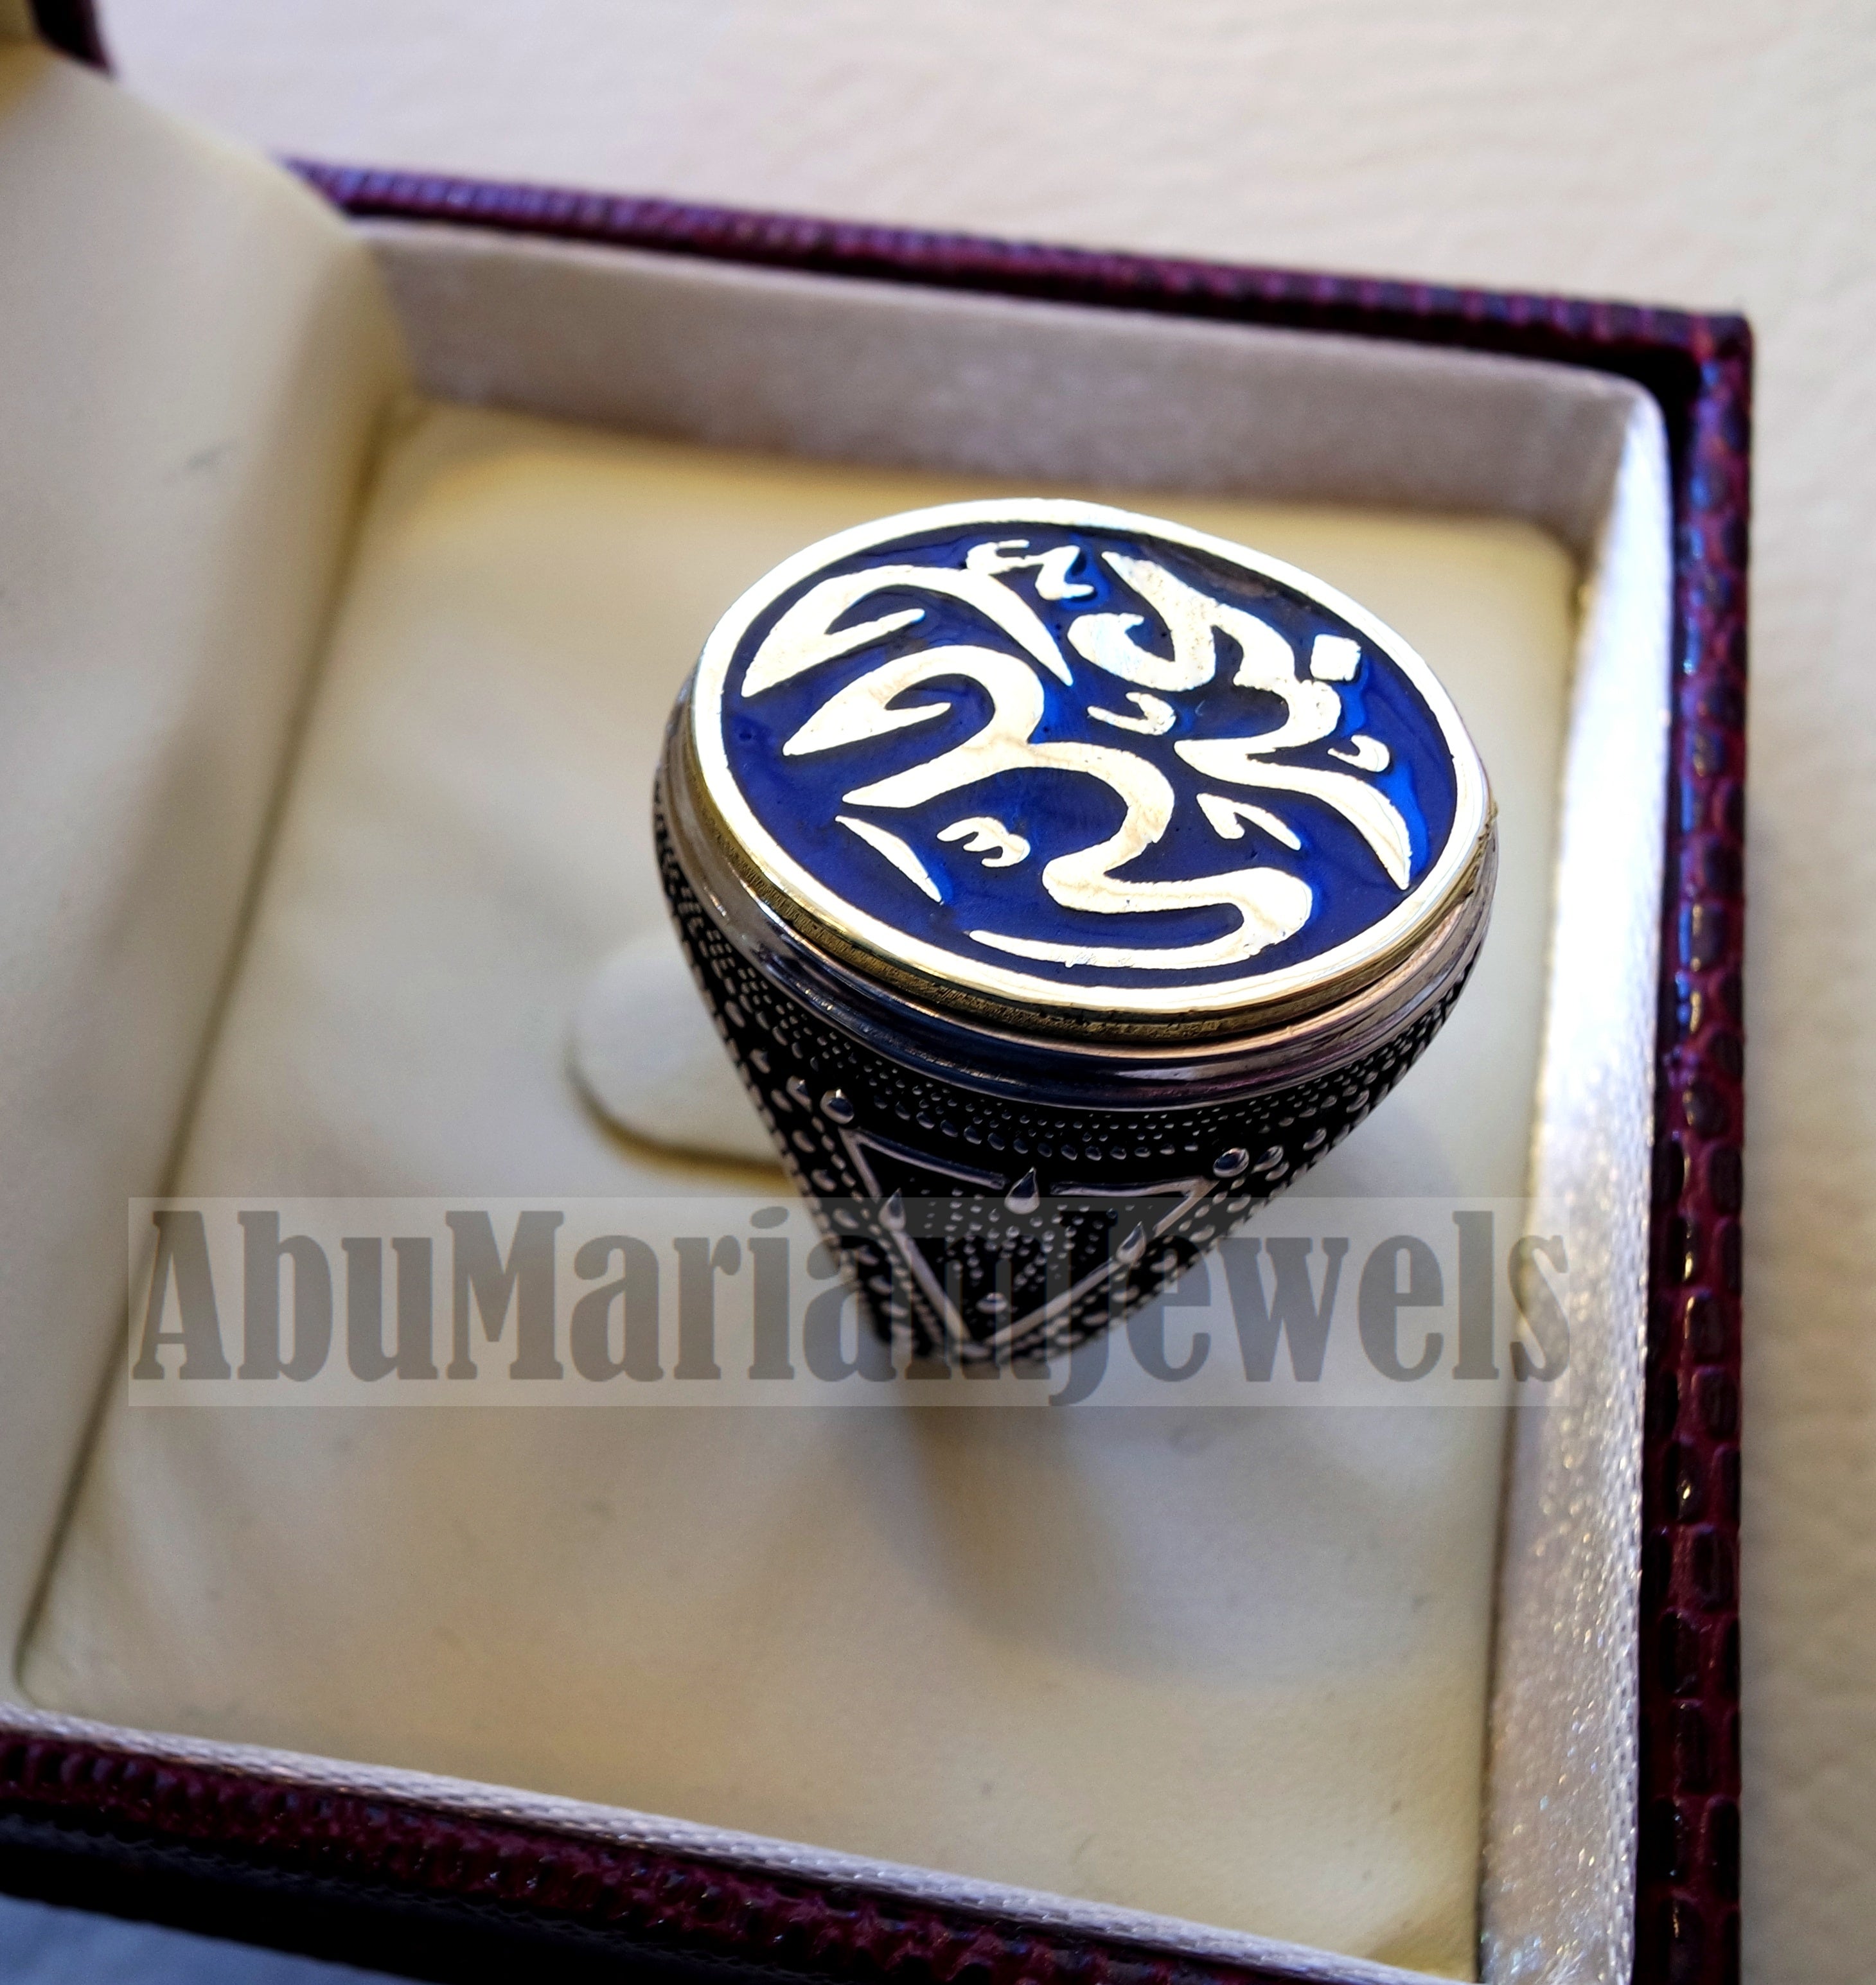 Customized Arabic calligraphy names ring personalized sterling silver 925 and bronze with dark blue enamel TSE1003 خاتم اسم تفصيل